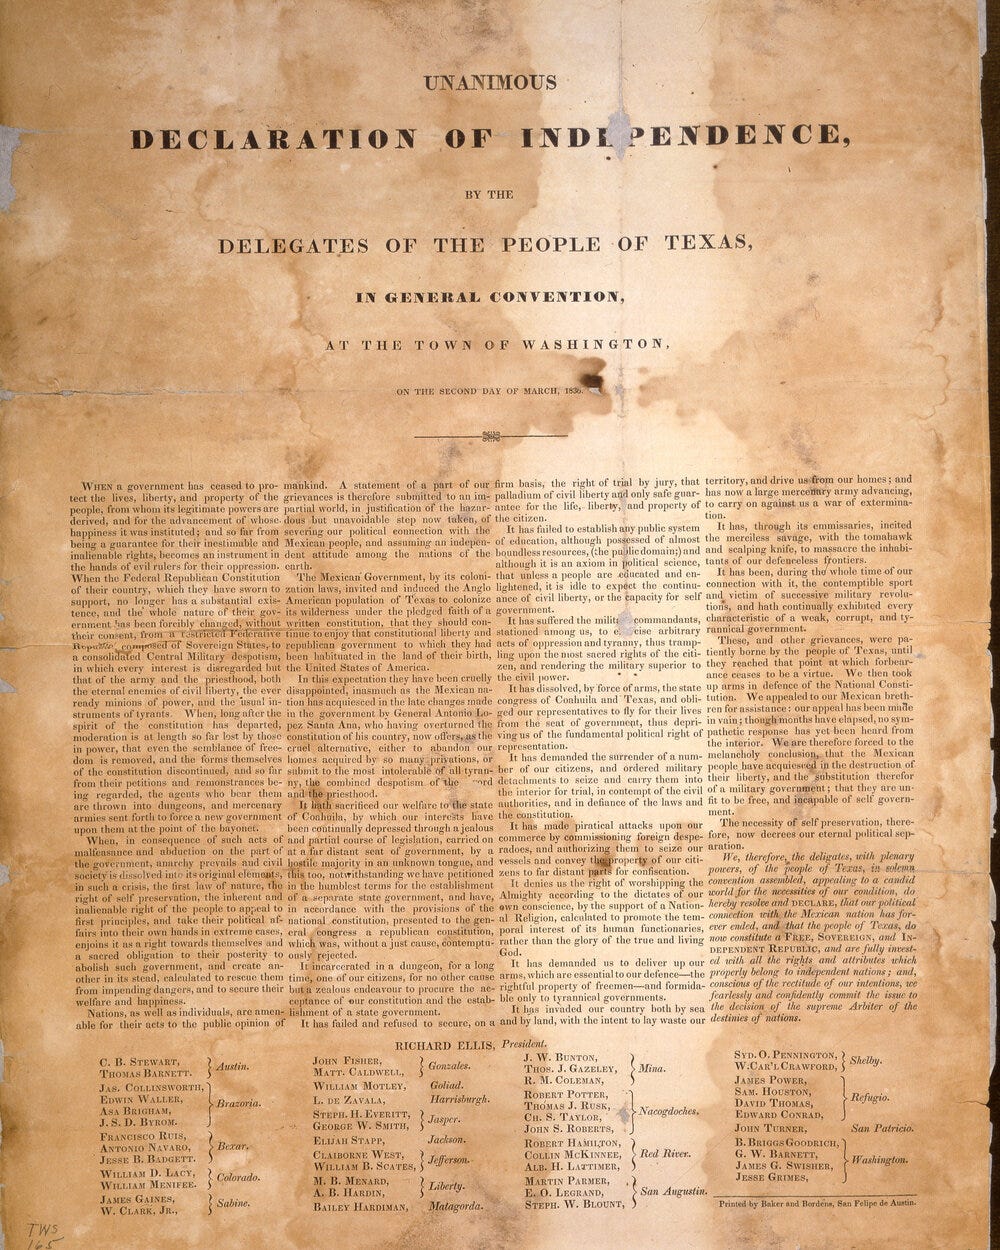 Texas Declaration of Independence, March 2, 1836